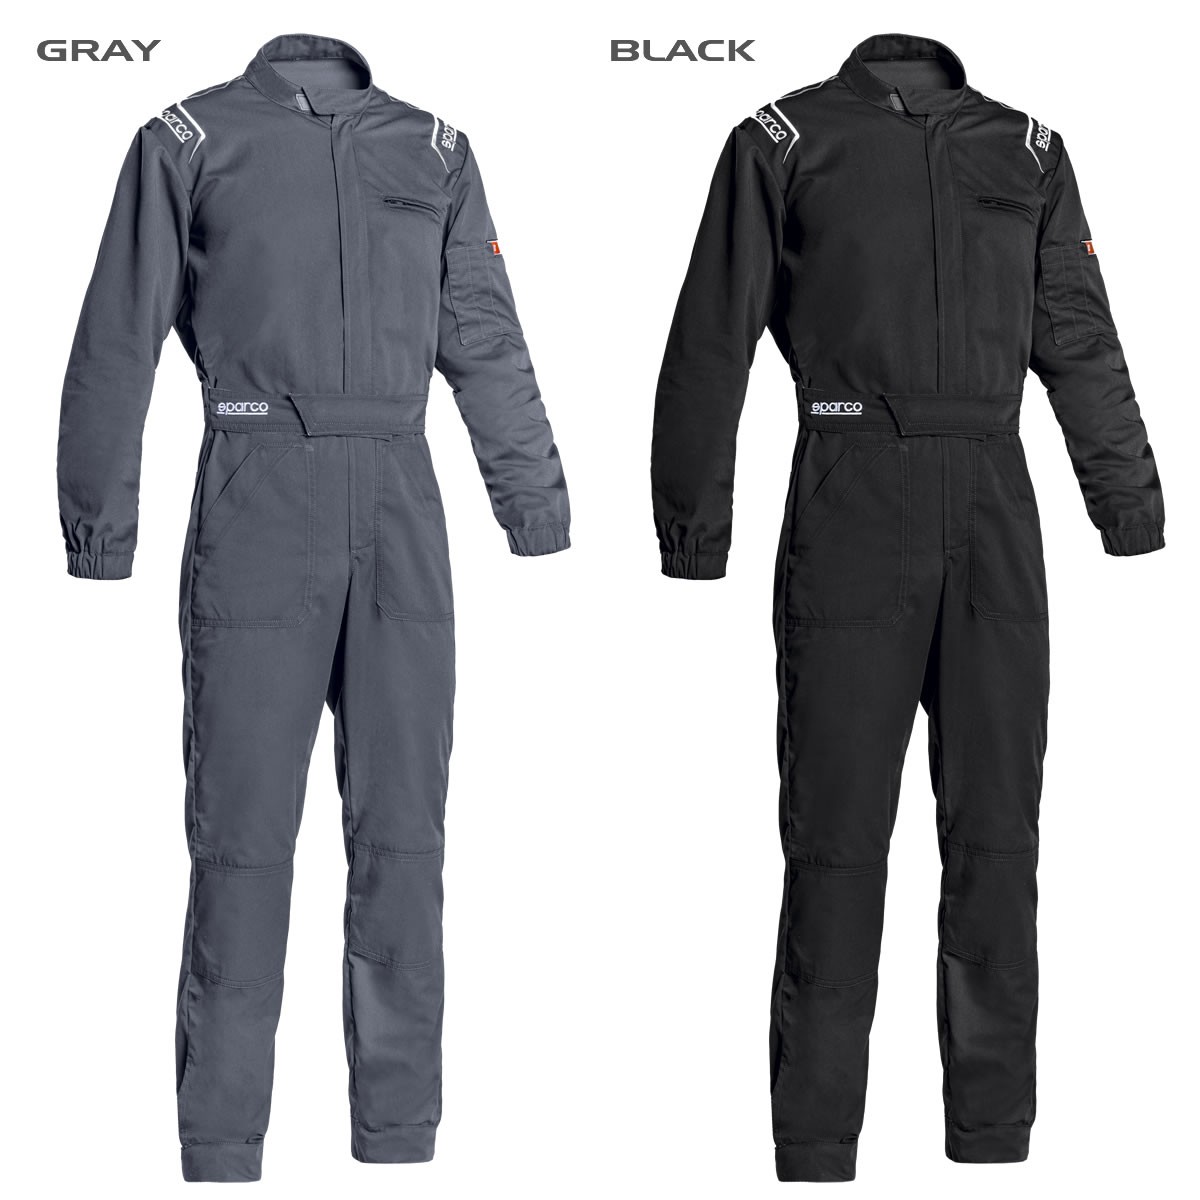  Sparco mechanism nik suit MS-3 long sleeve coverall Sparco